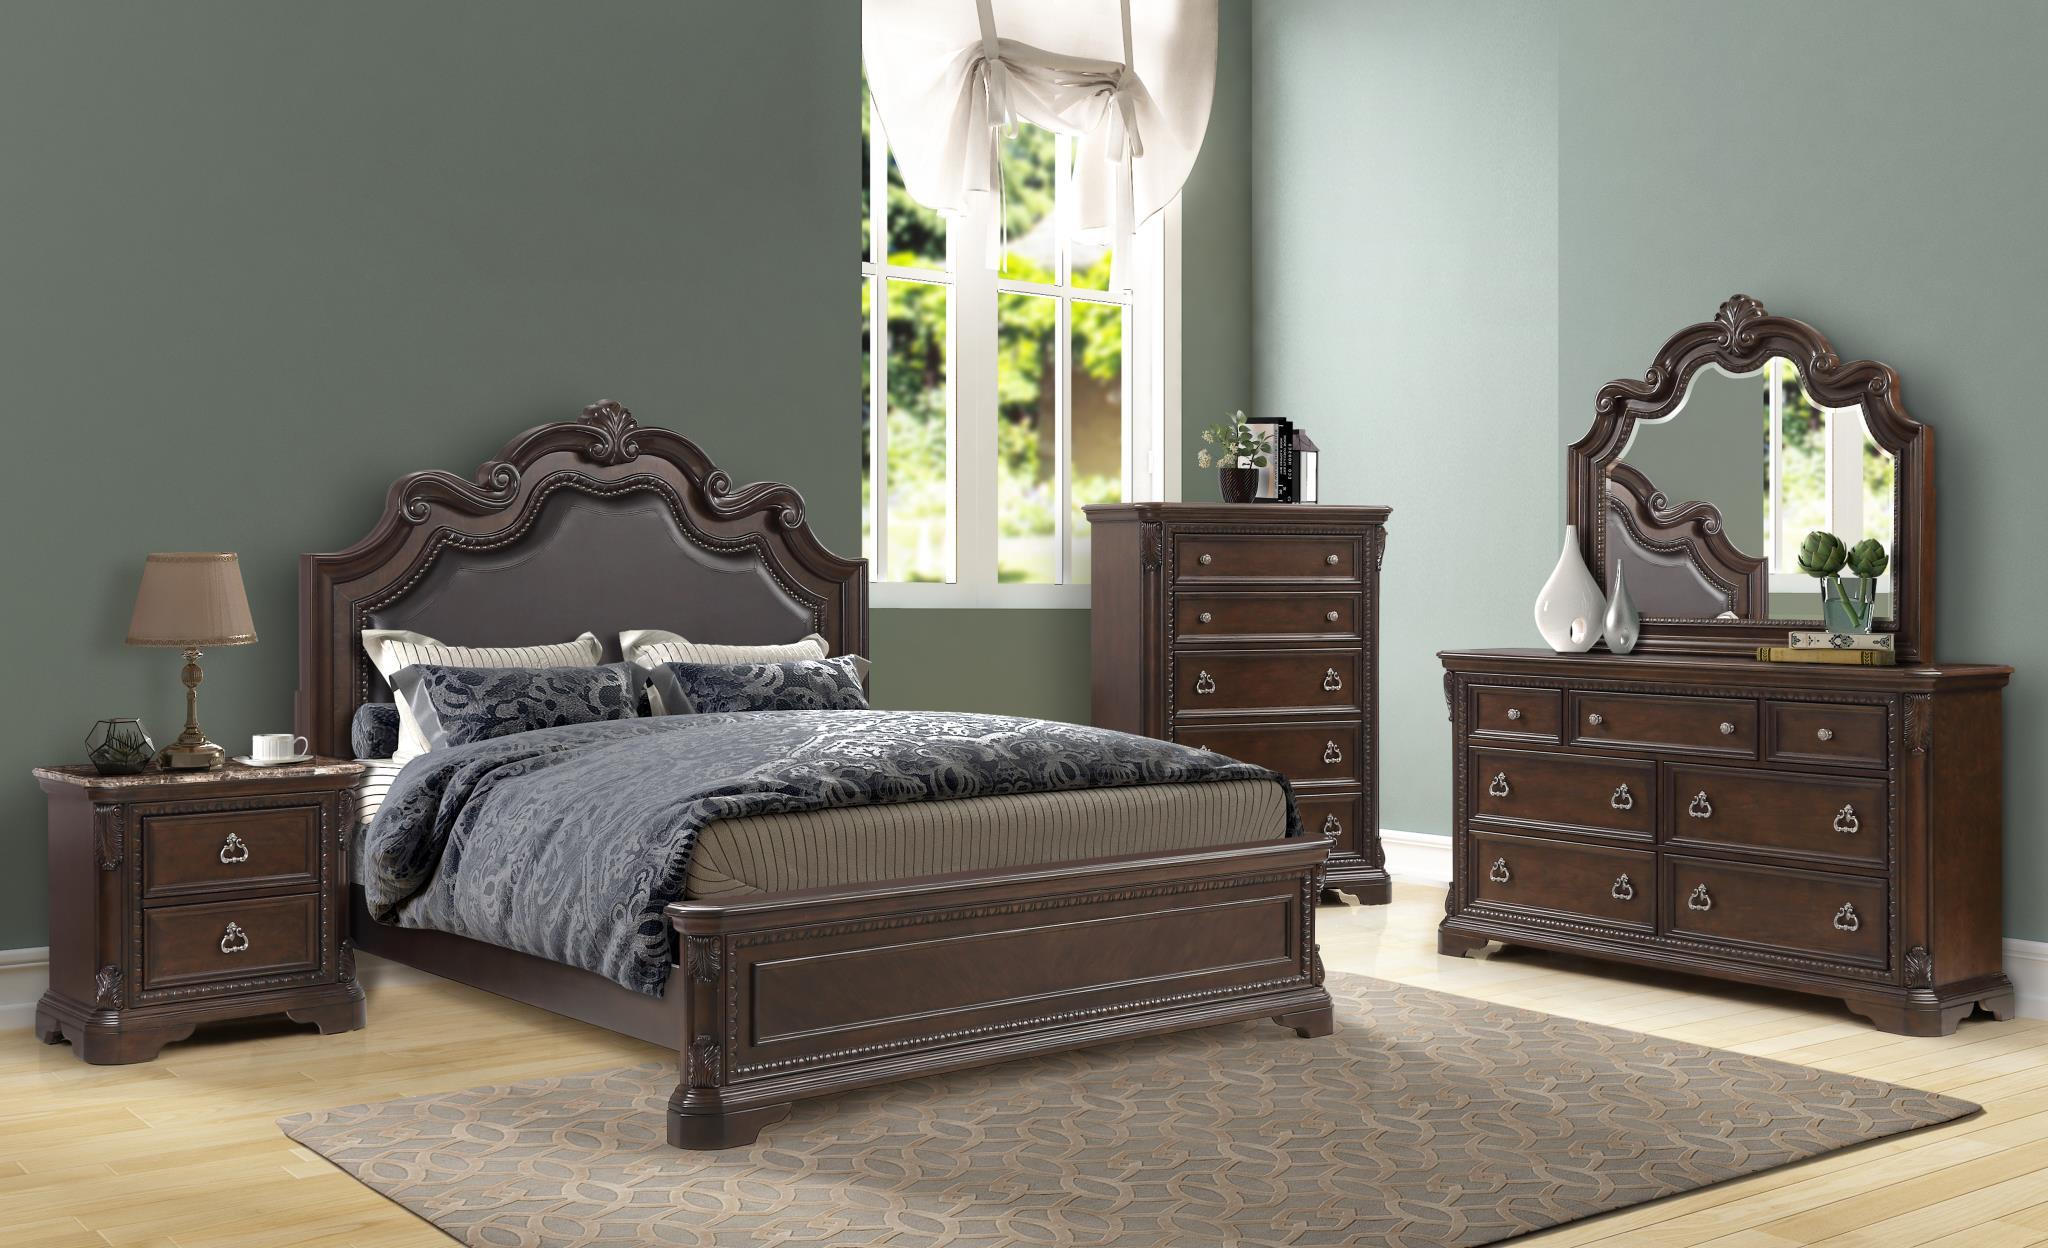 Modern, Transitional Bedroom Set COVENTRY 1988-112-Set-6 1988-112-2NDMC-6PC in Mahogany Bonded Leather